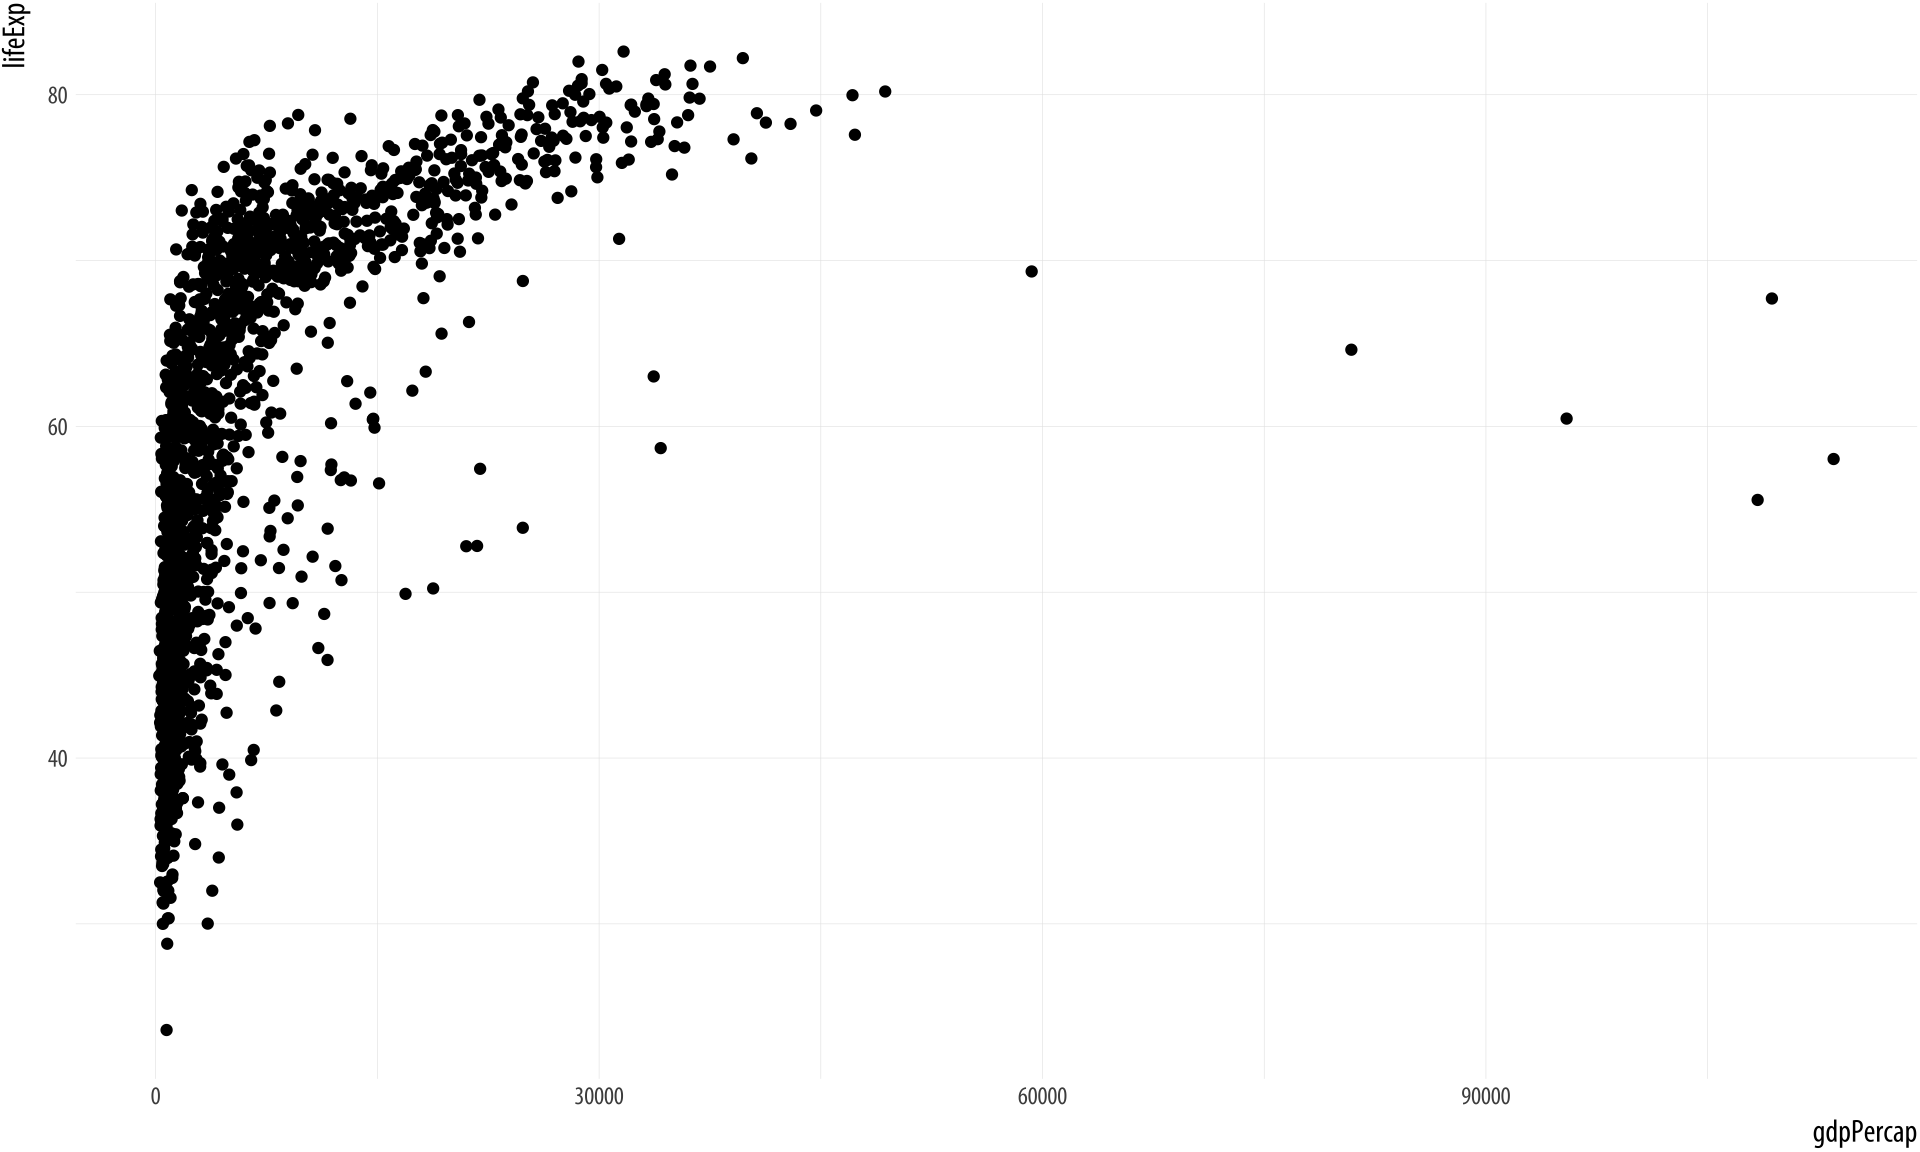 Life expectancy plotted against GDP per capita for a large number of country-years.